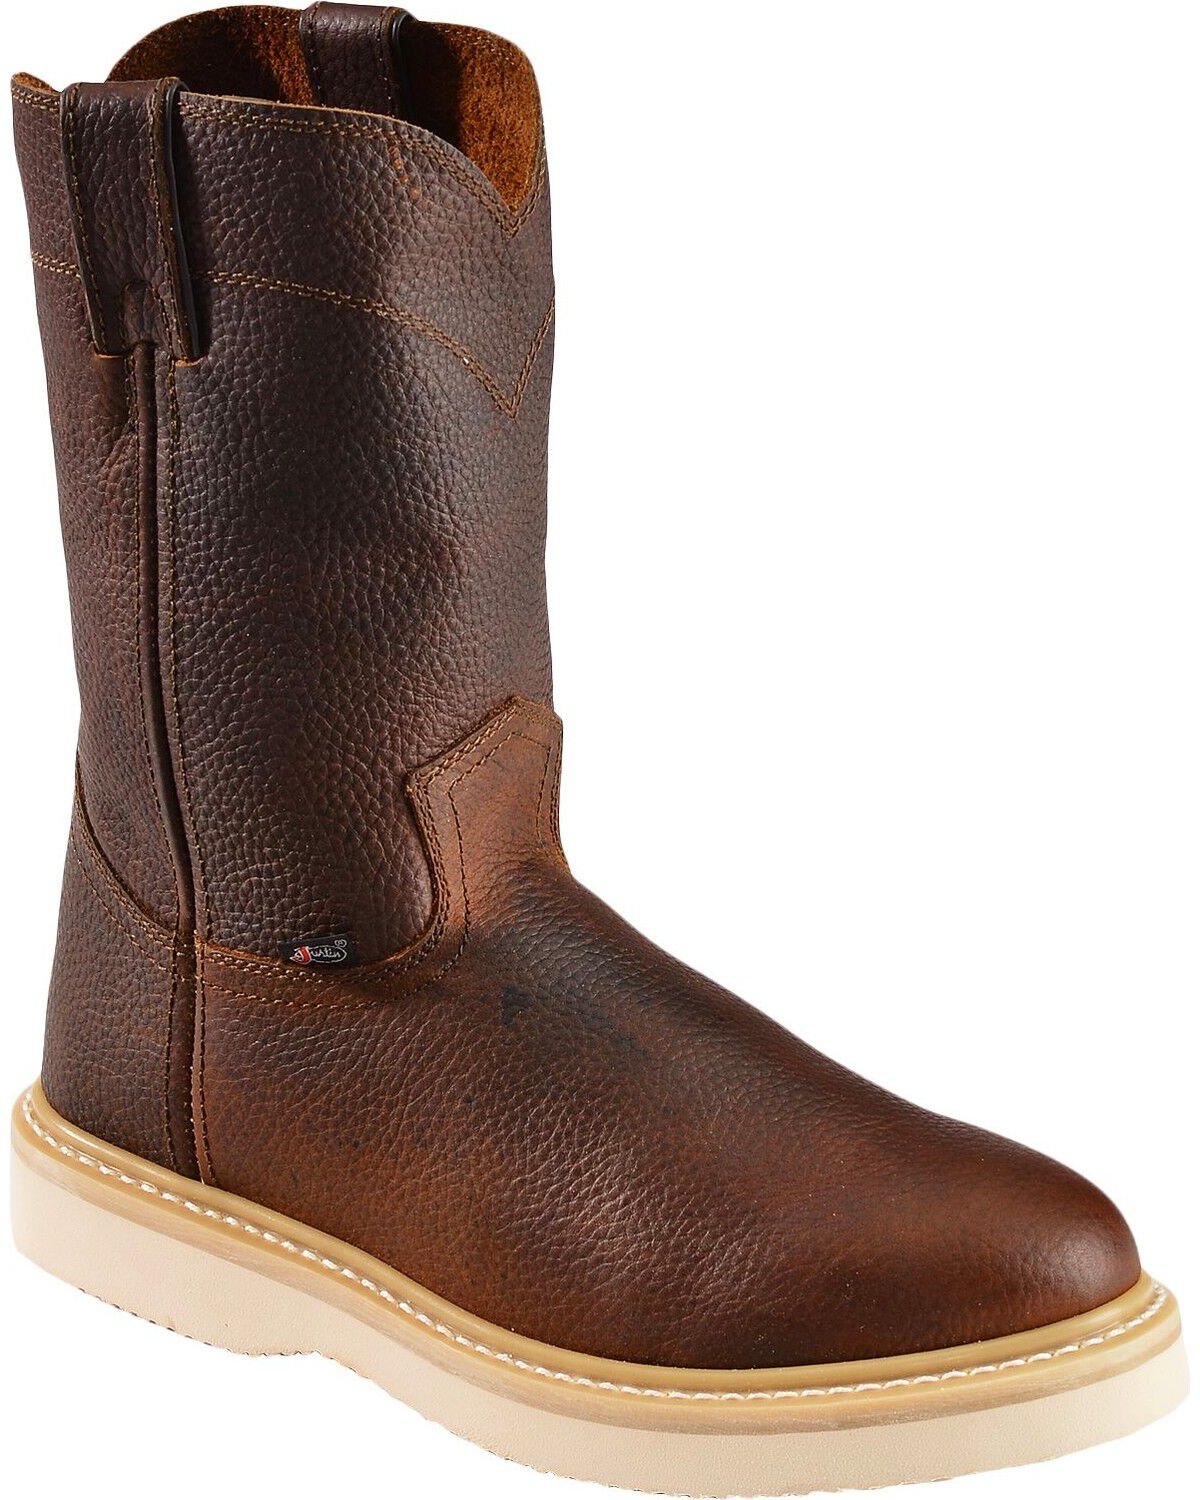 pull on wedge sole work boots